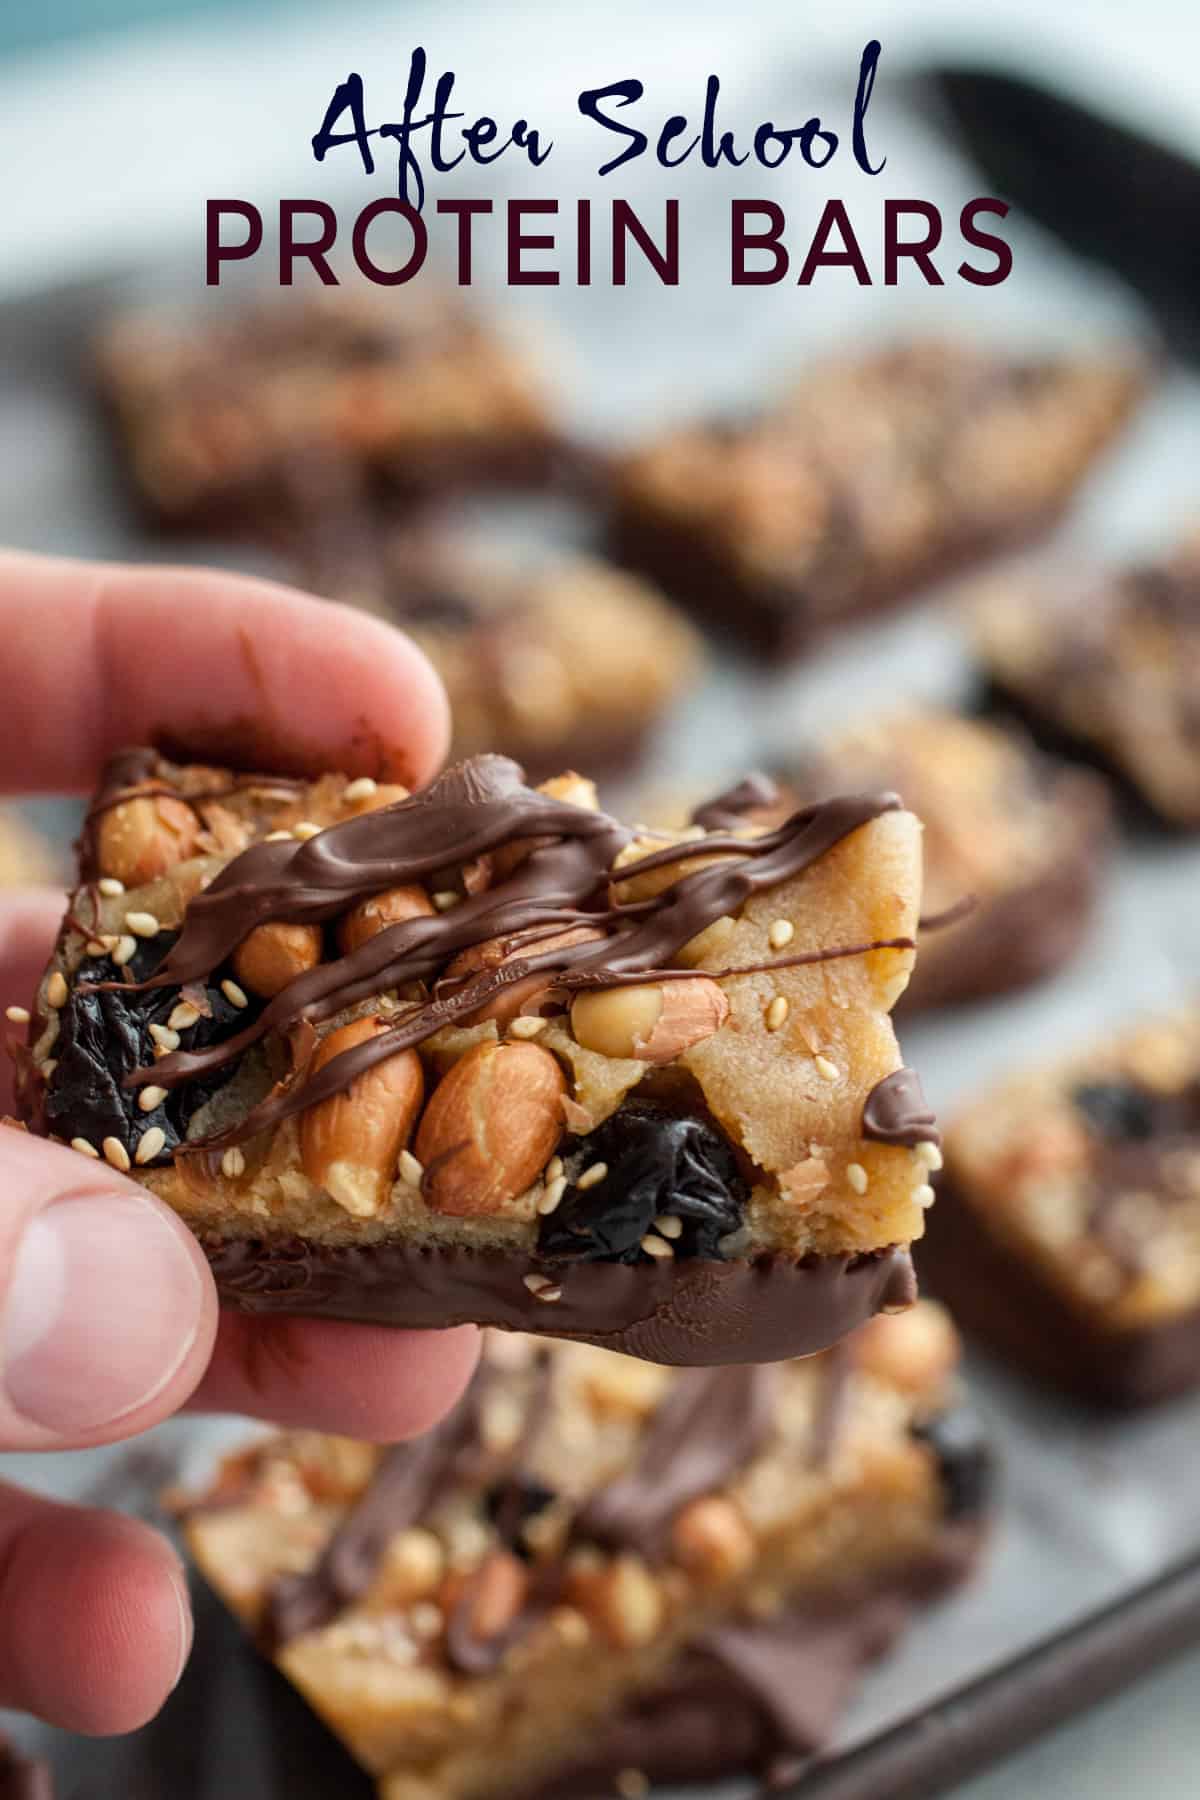 After School Protein Bars